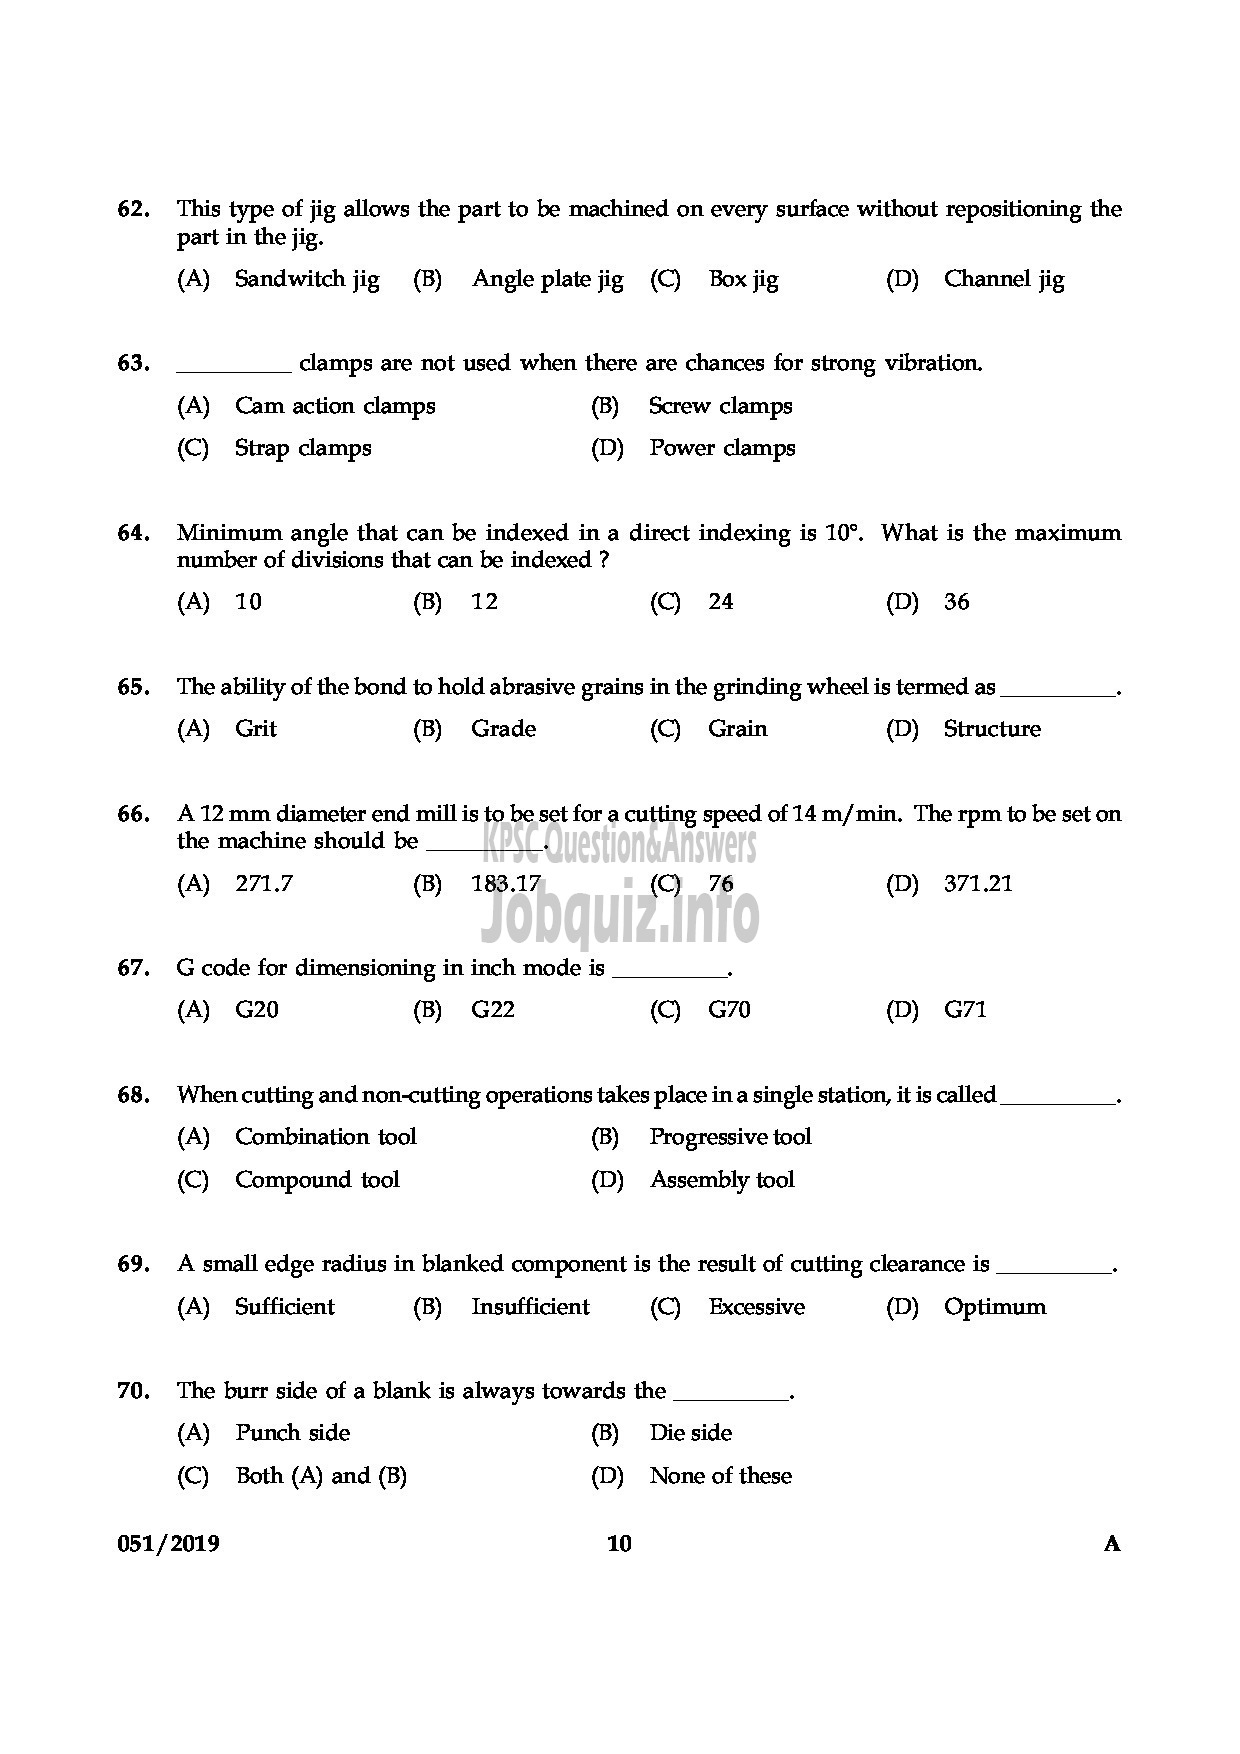 Kerala PSC Question Paper - JUNIOR INSTRUCTOR TOOL & DIE MAKER INDUSTRIAL TRAINING English -10